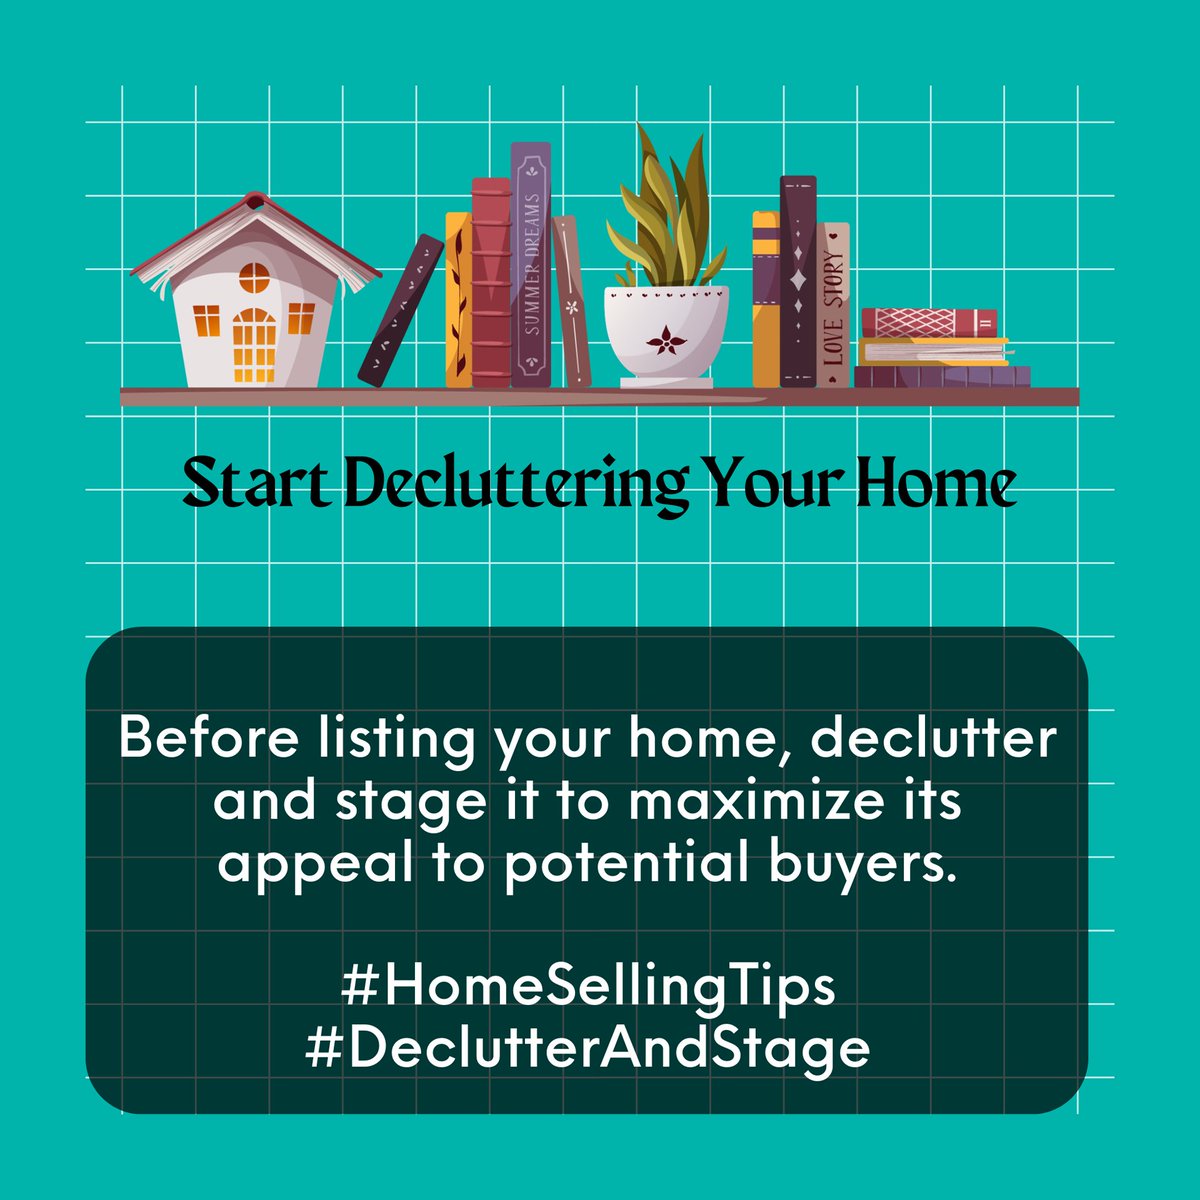 Can't stress this enough! A clean and decluttered home sells quicker and has more appeal to potential buyers.

#HomeSellingTips #DeclutterAndStage 
#RealEstateFacts #OurSanAntonioHome #LizaKingTeam